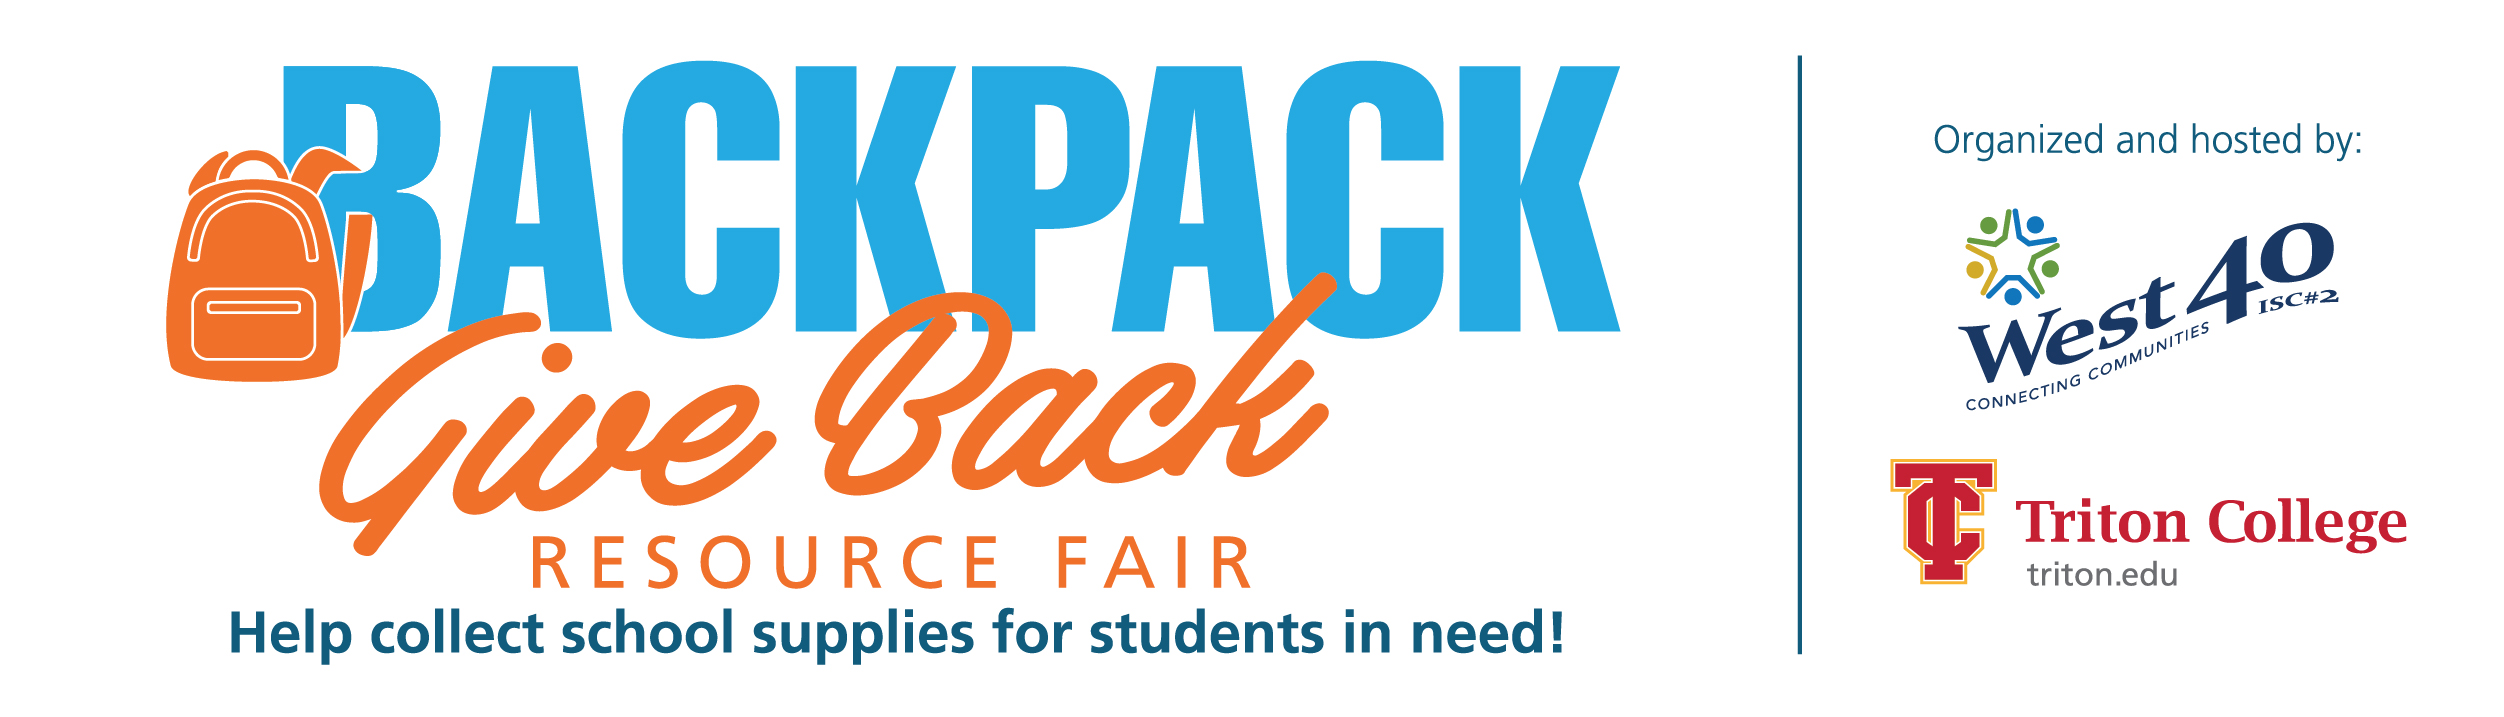 Backpack Giveback Resource Fair Supplies Collection